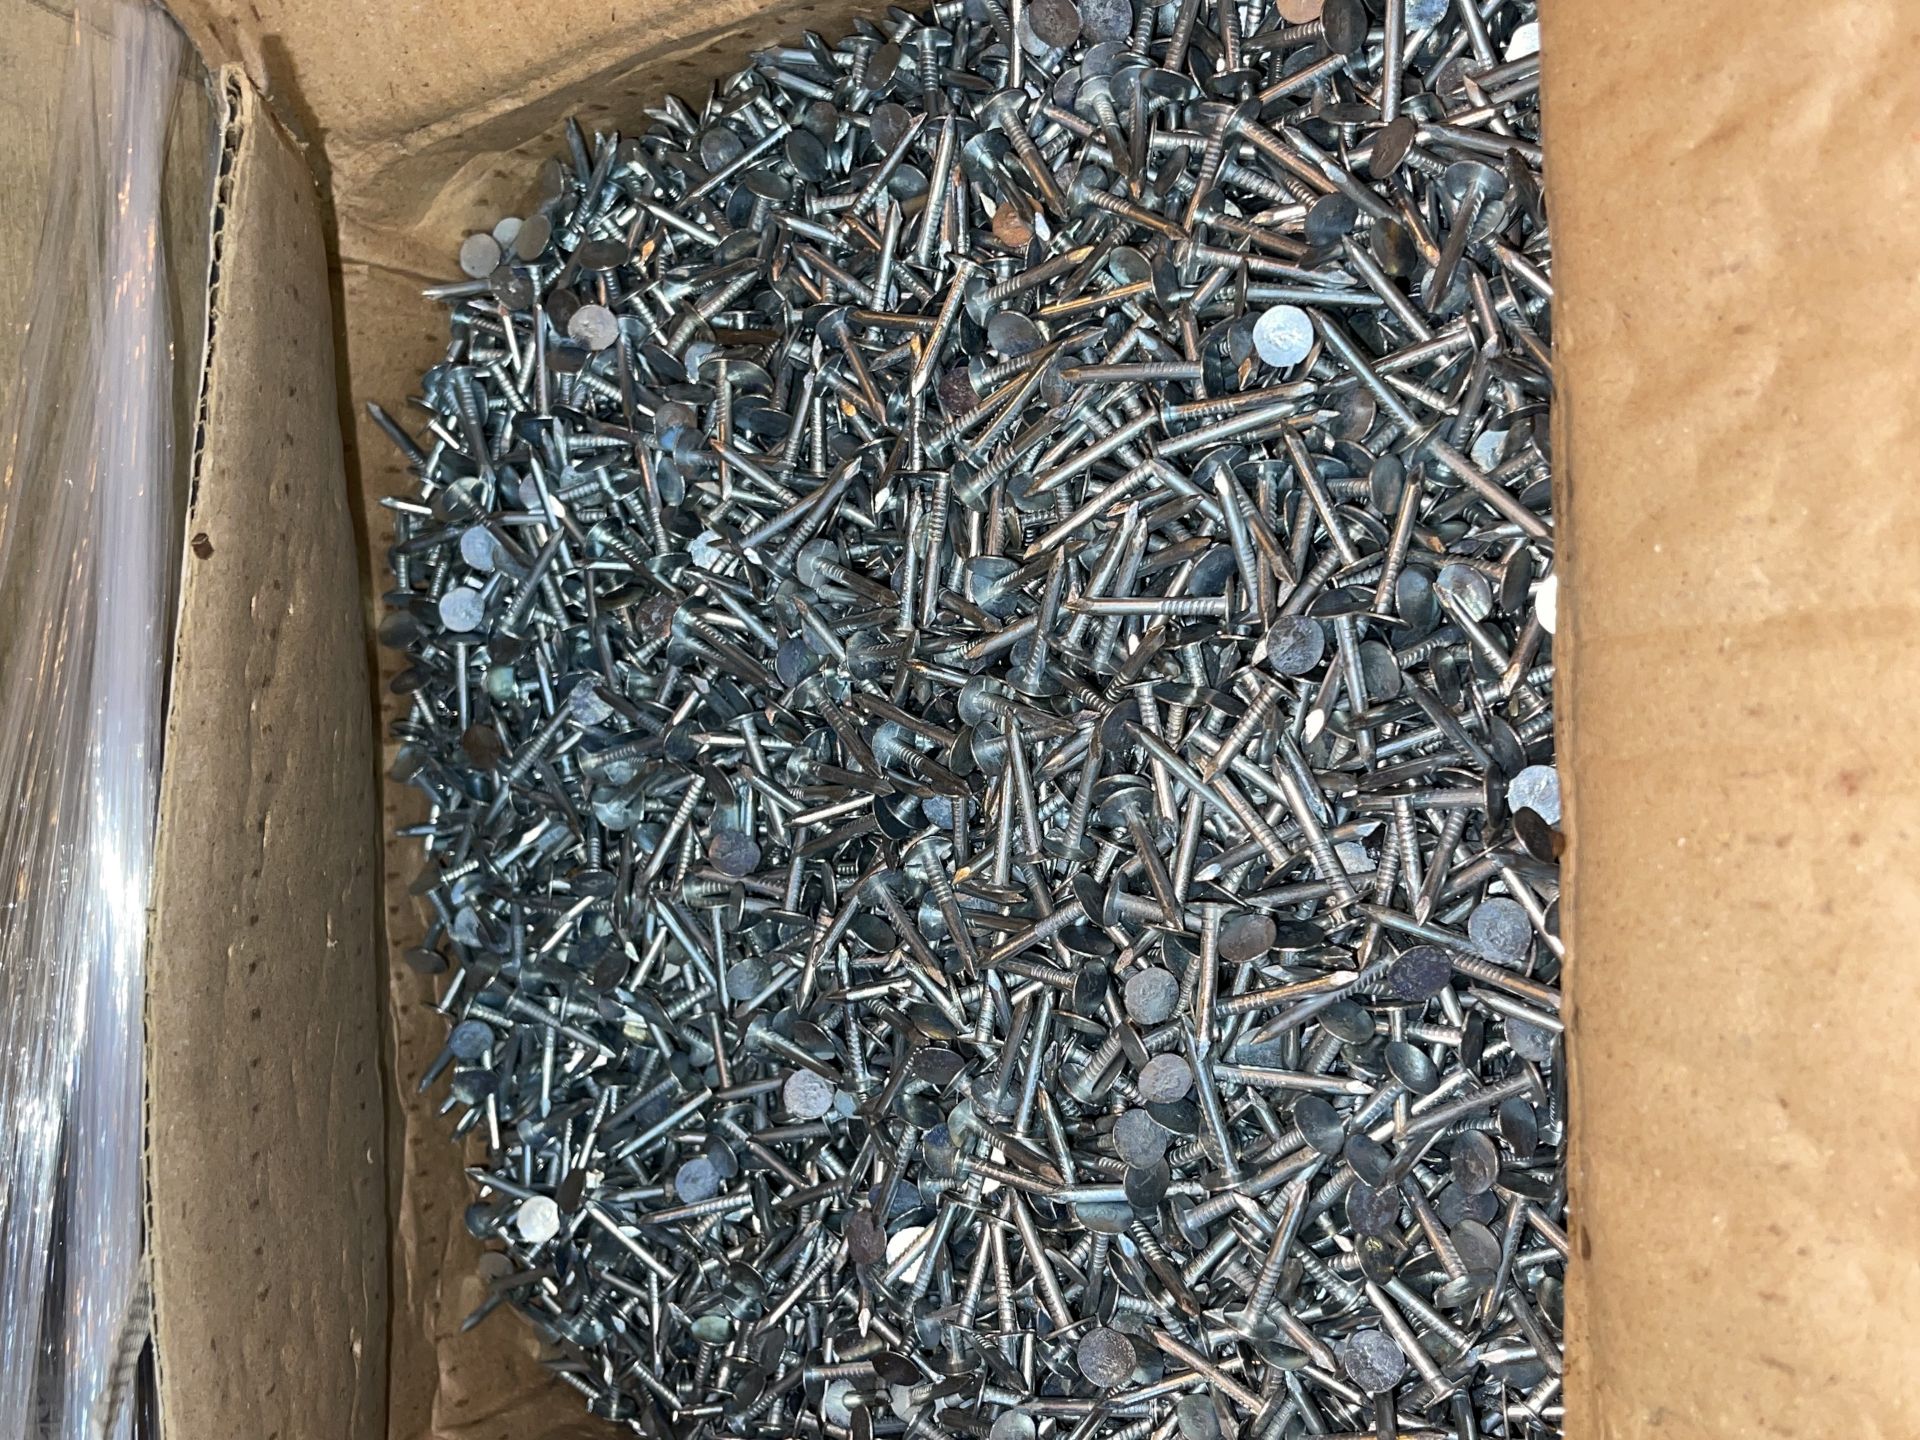 Huge Lot of Siding Nails (AM11) - Lester, Pa - Image 6 of 9